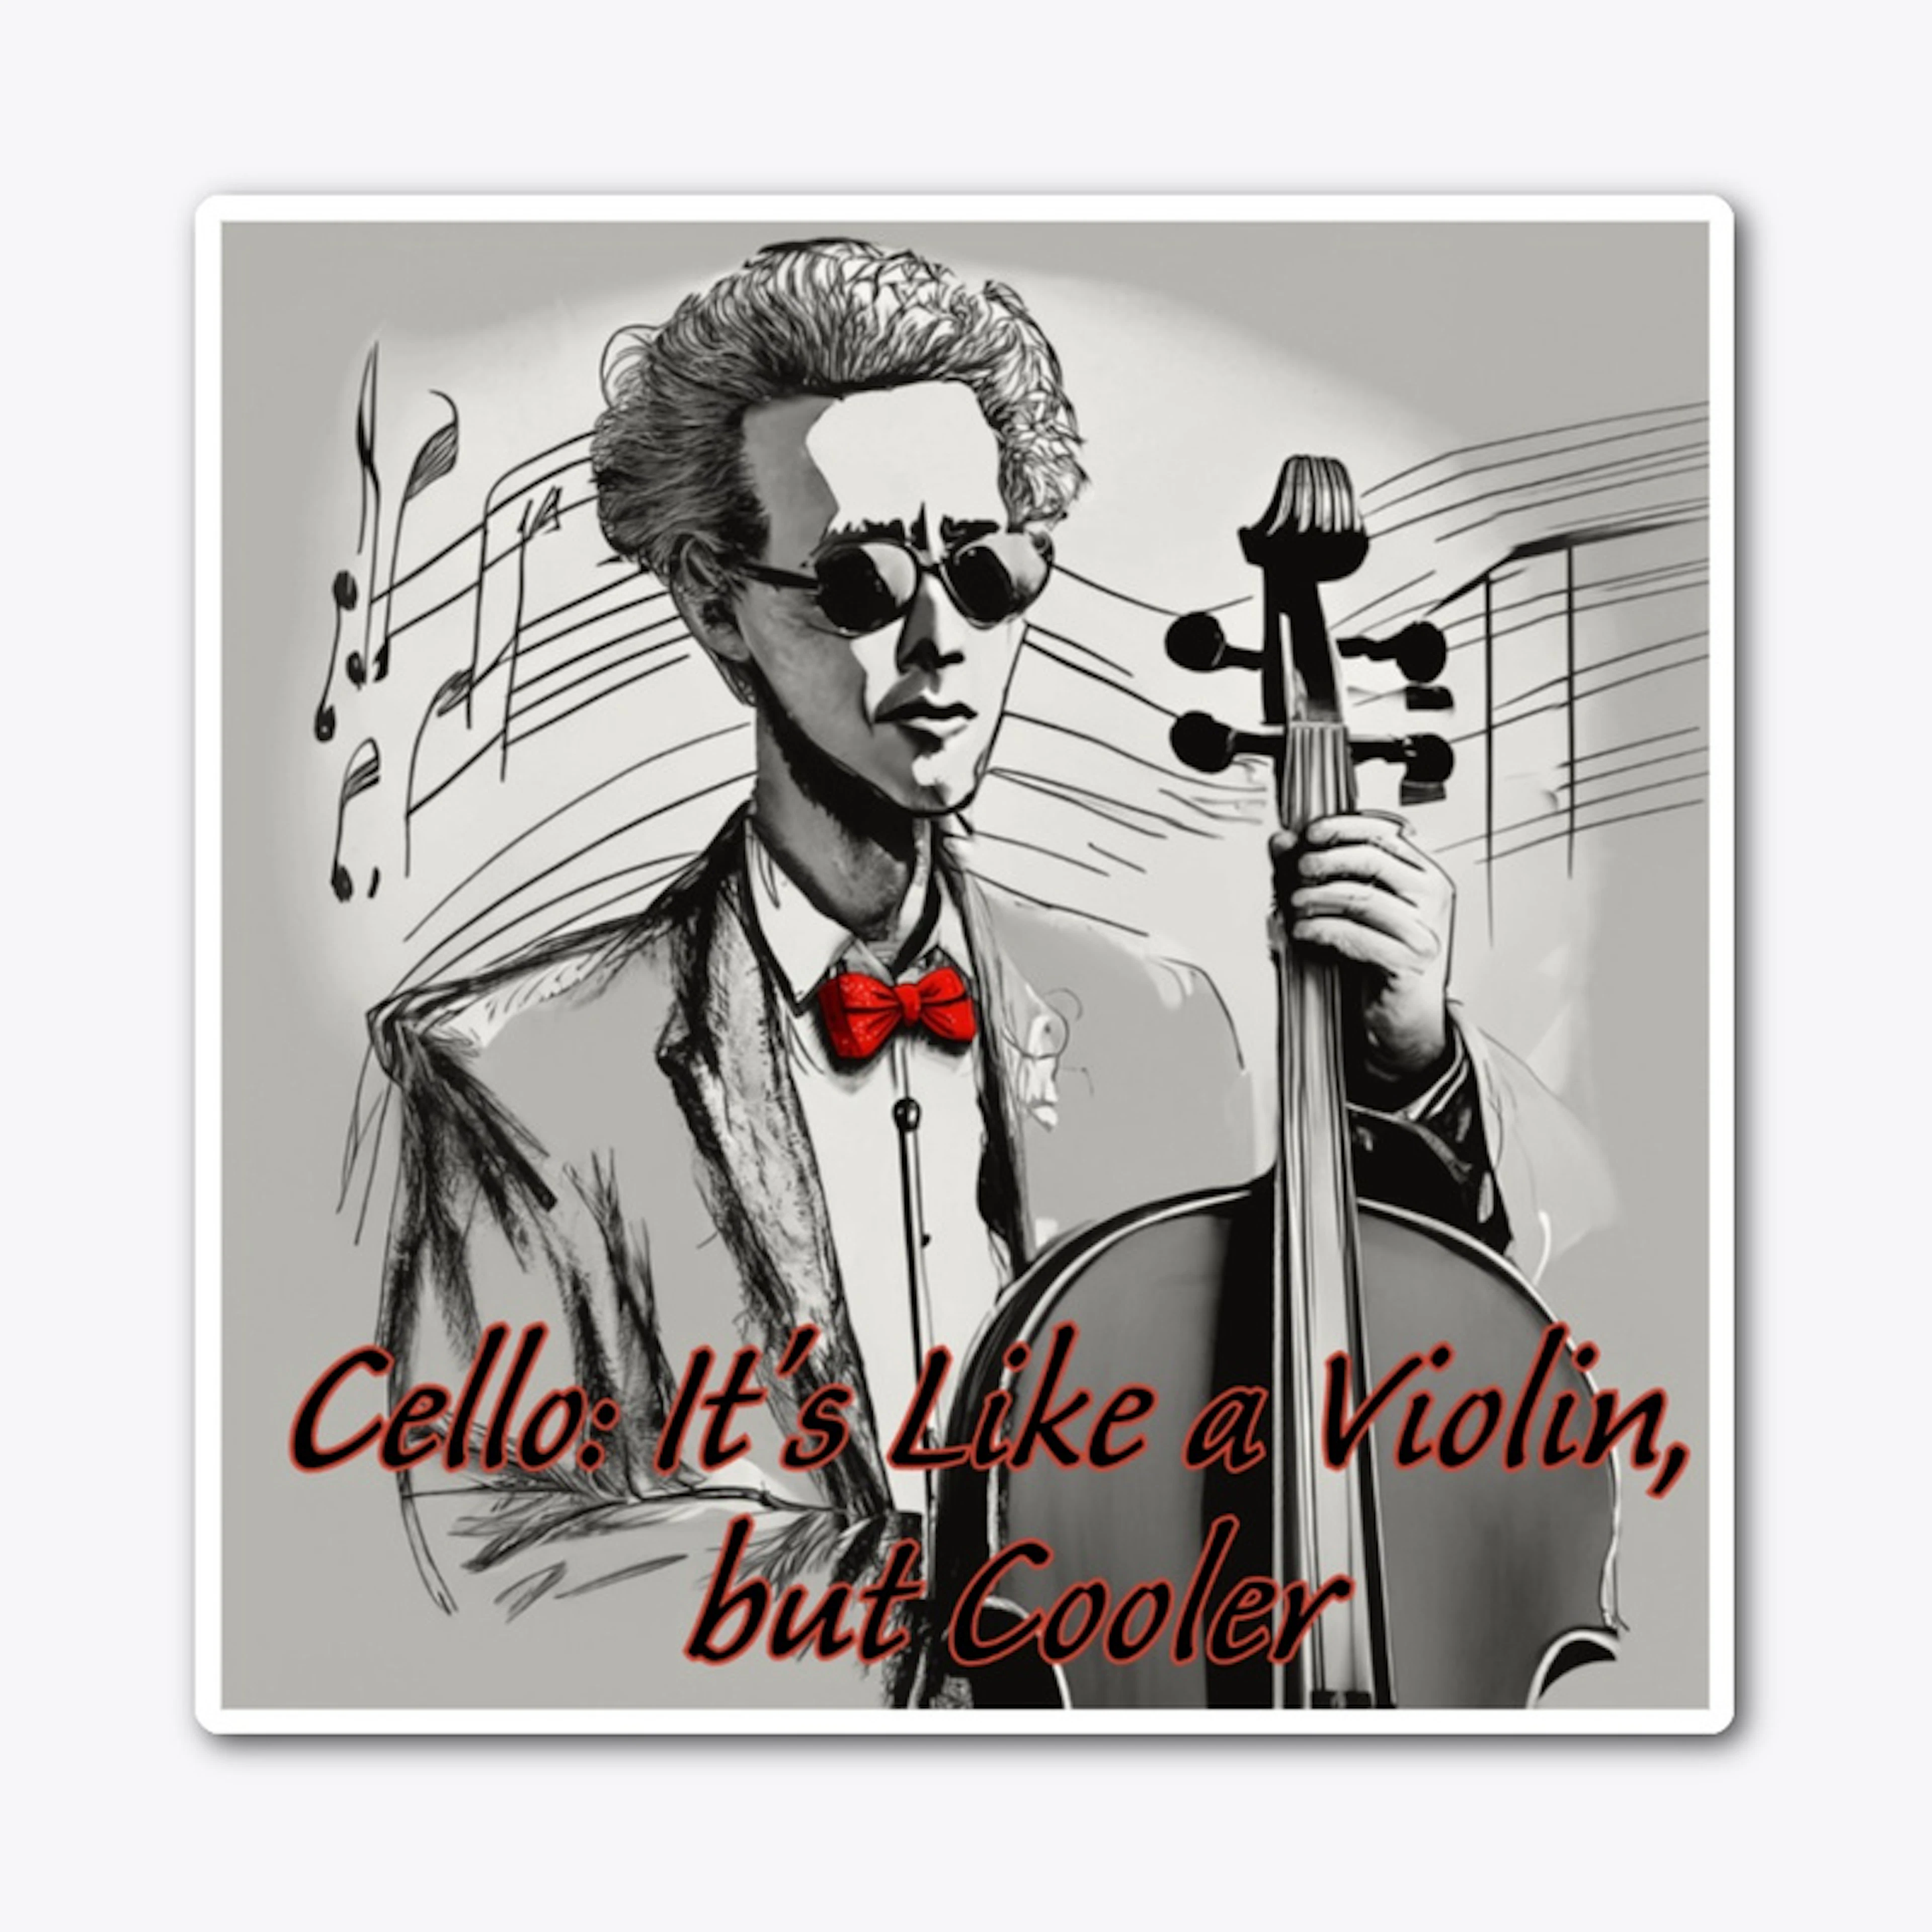 Cello is cool!